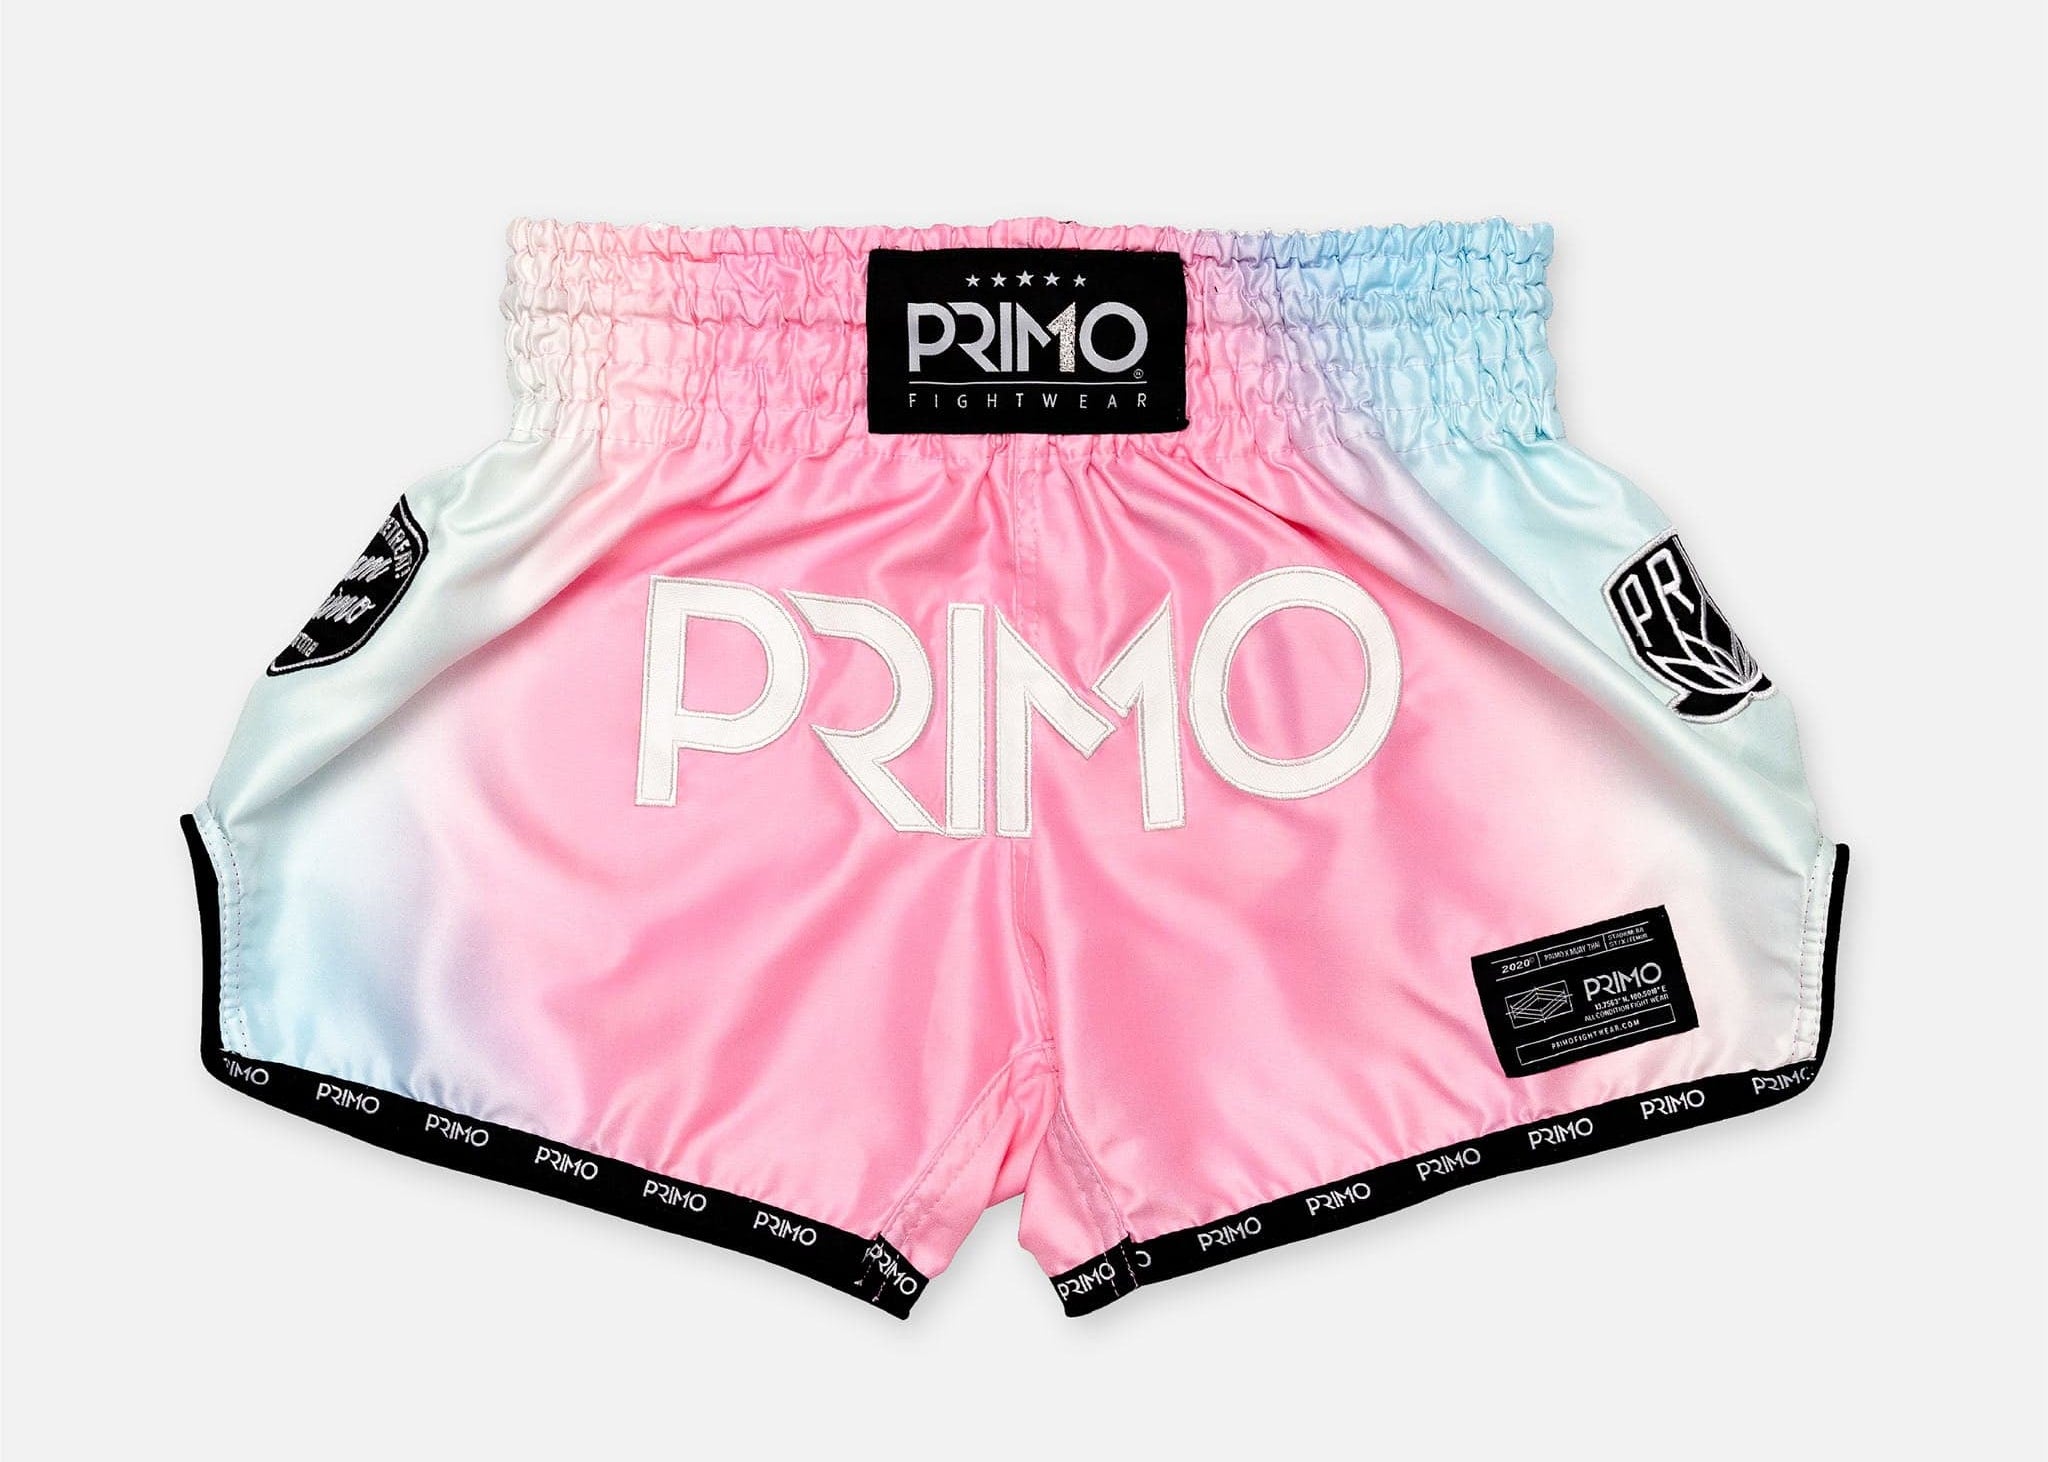 Primo Fight Wear Official Muay Thai Shorts - Miami Lights